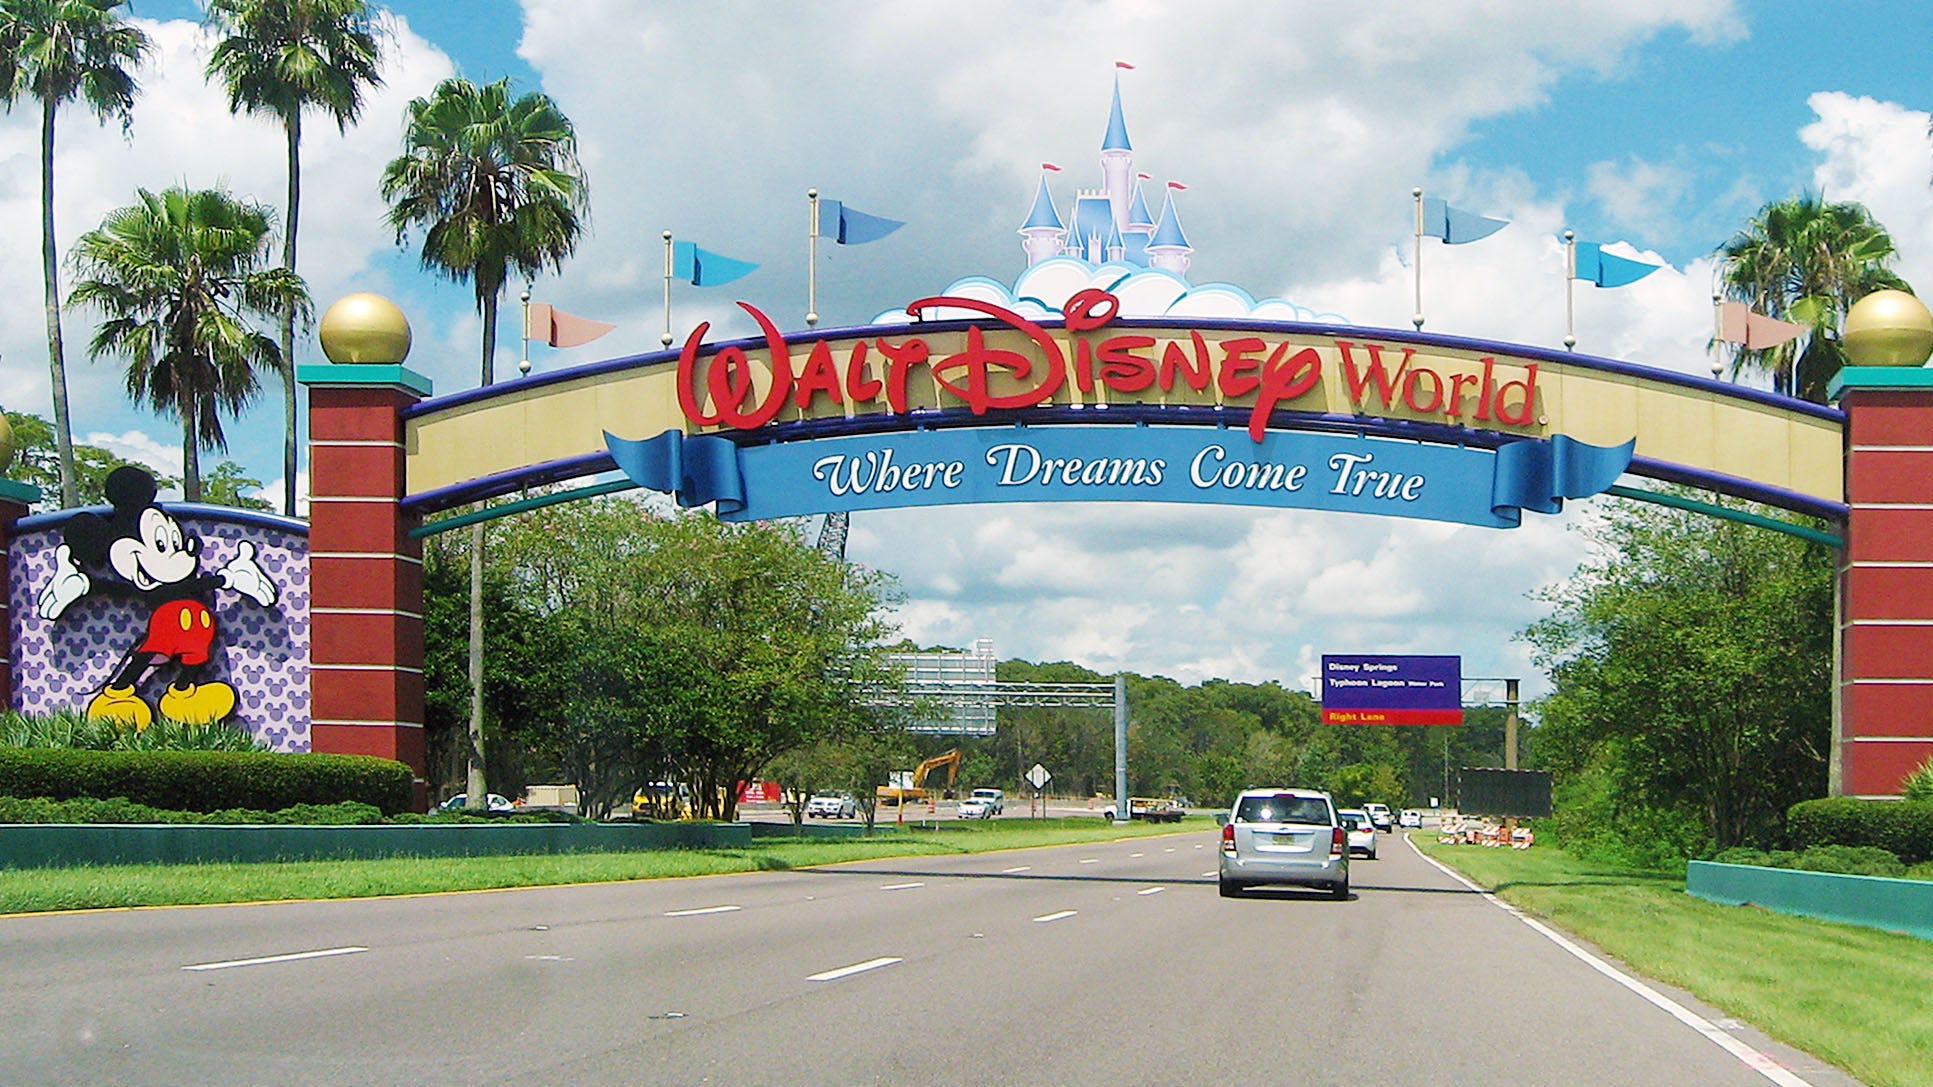 Disney World brings back food festivals with COVID-19 restrictions in place